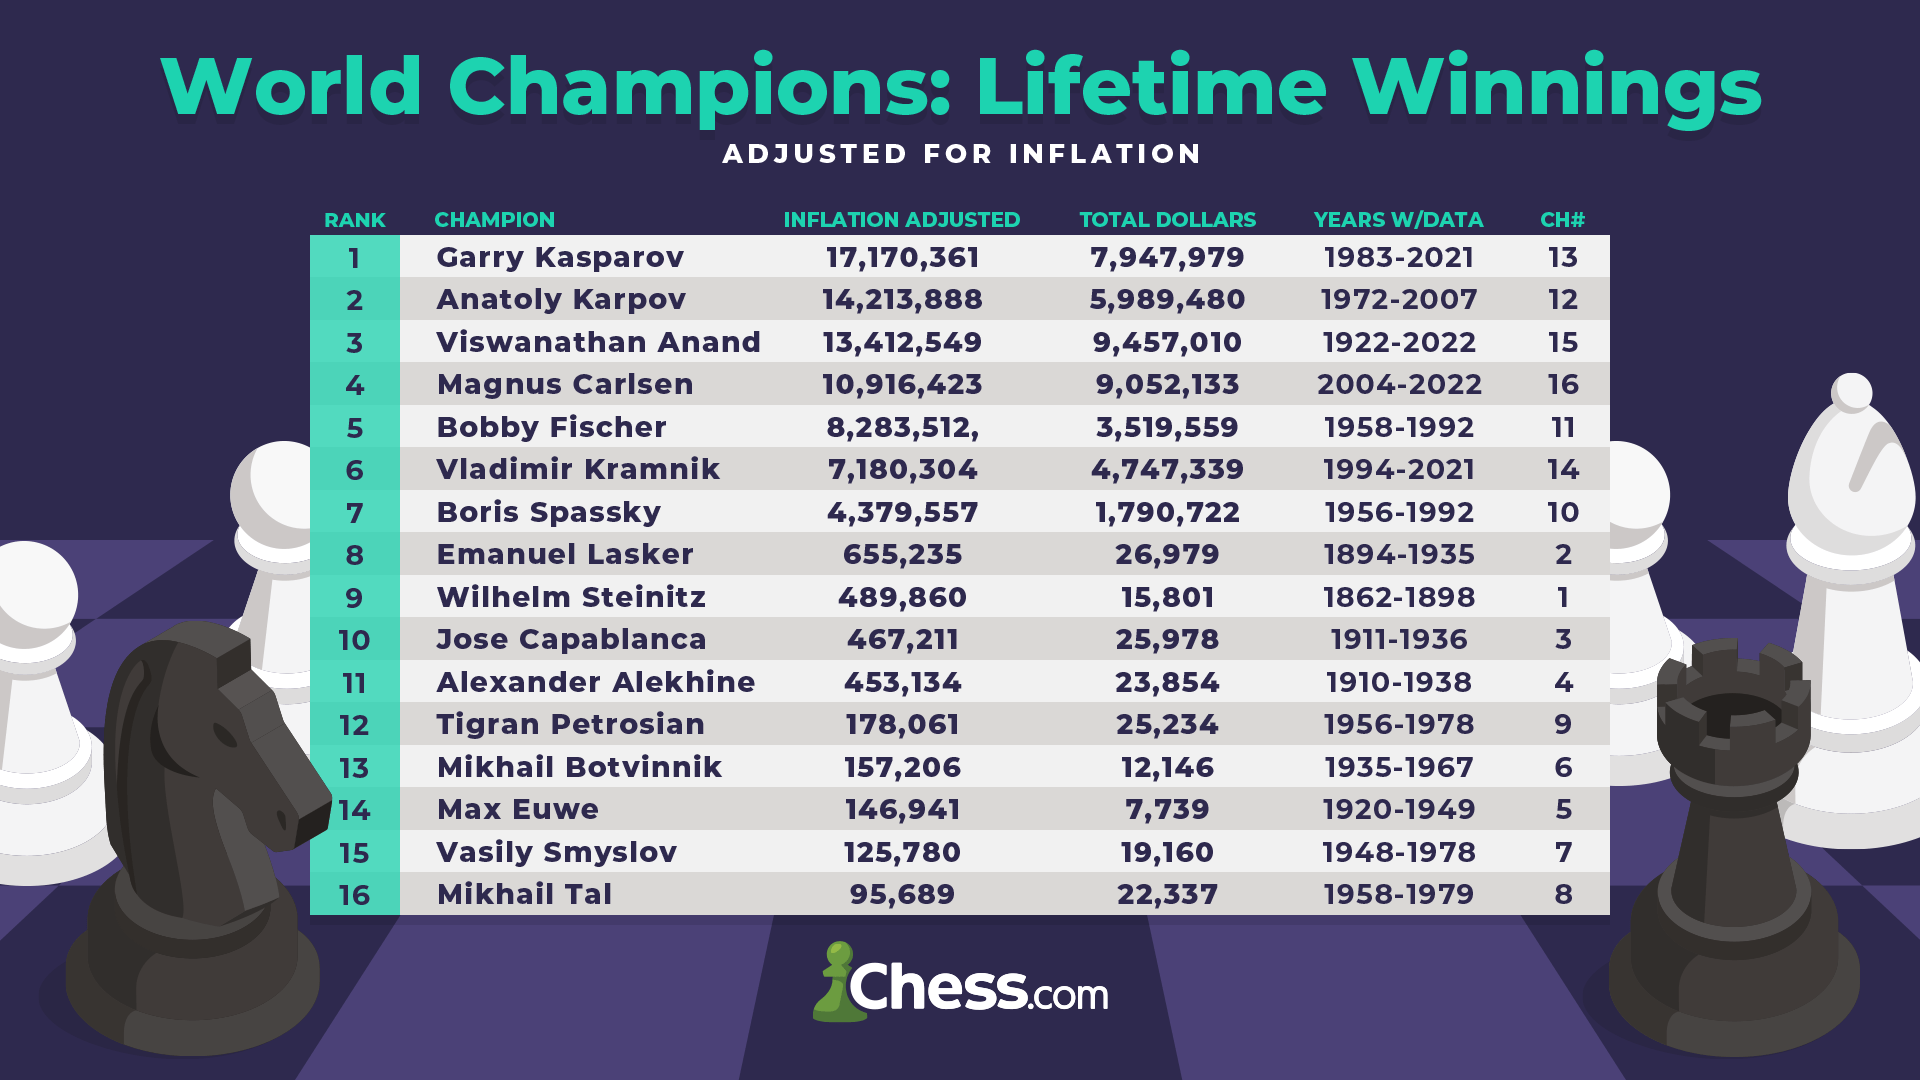 World Chess Championship - The History, Top Champions, and